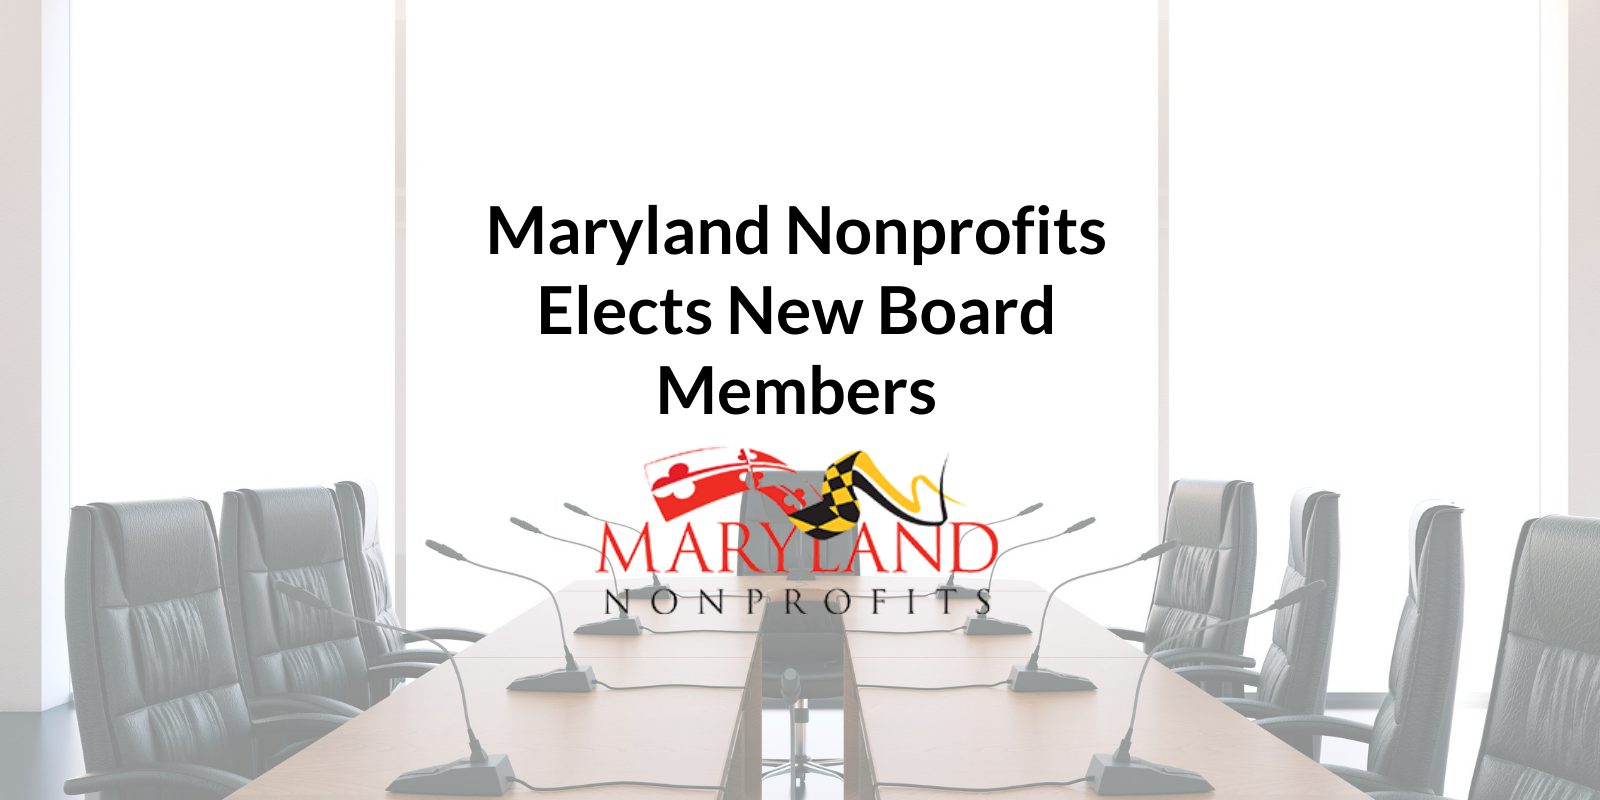 Maryland nonprofits elects new board members